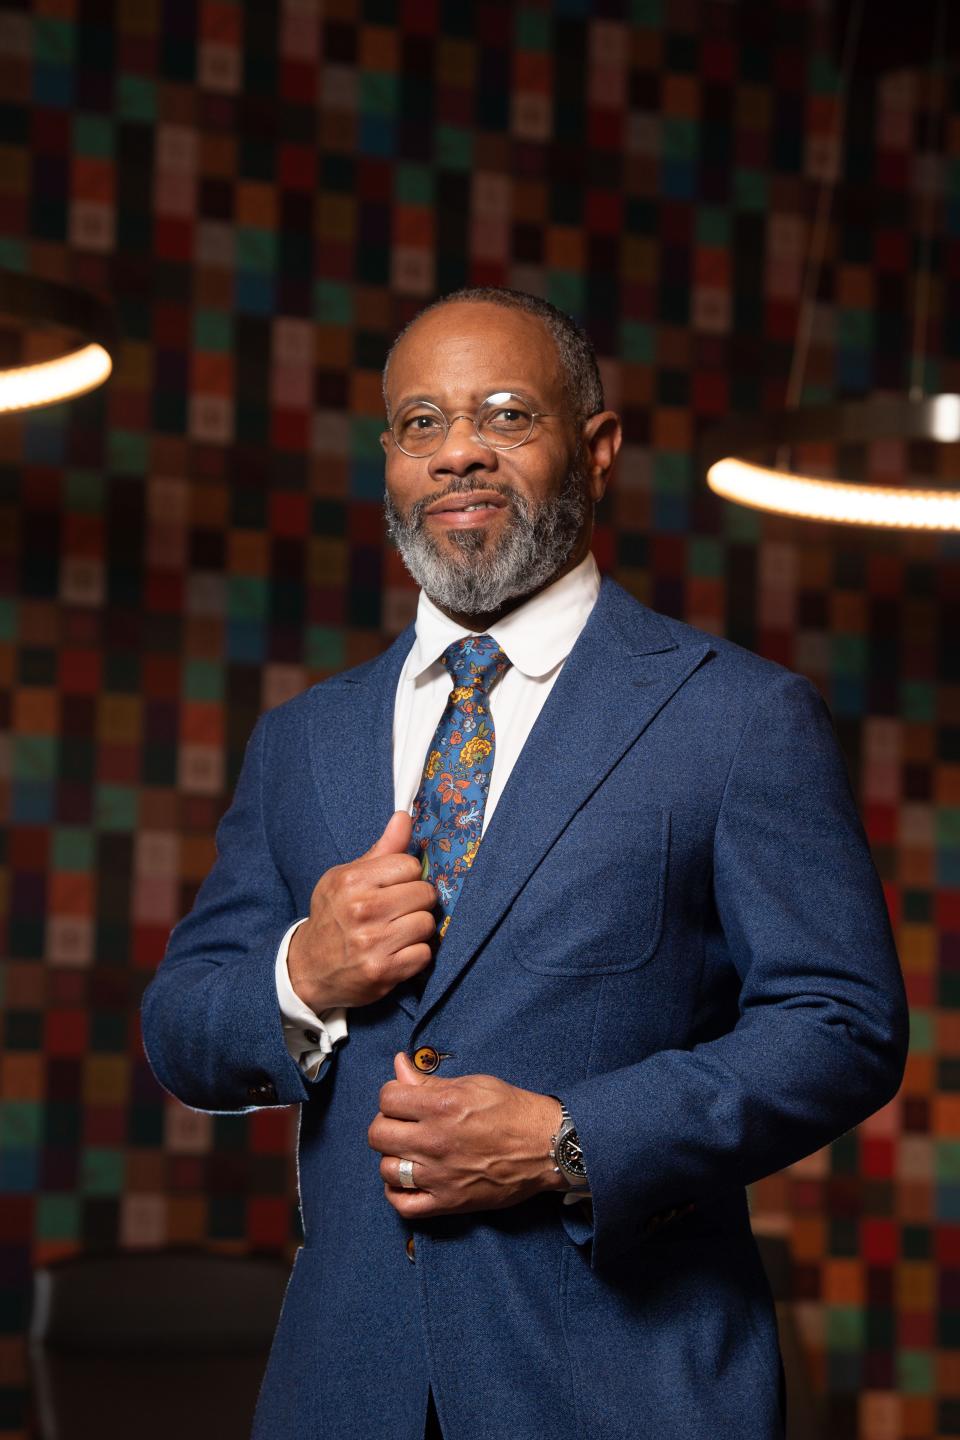 Under his firm, Don Hardin has served as the project manager for the National Museum of African American Music, while also managing key projects by Nissan North America, Vanderbilt University and HCA.